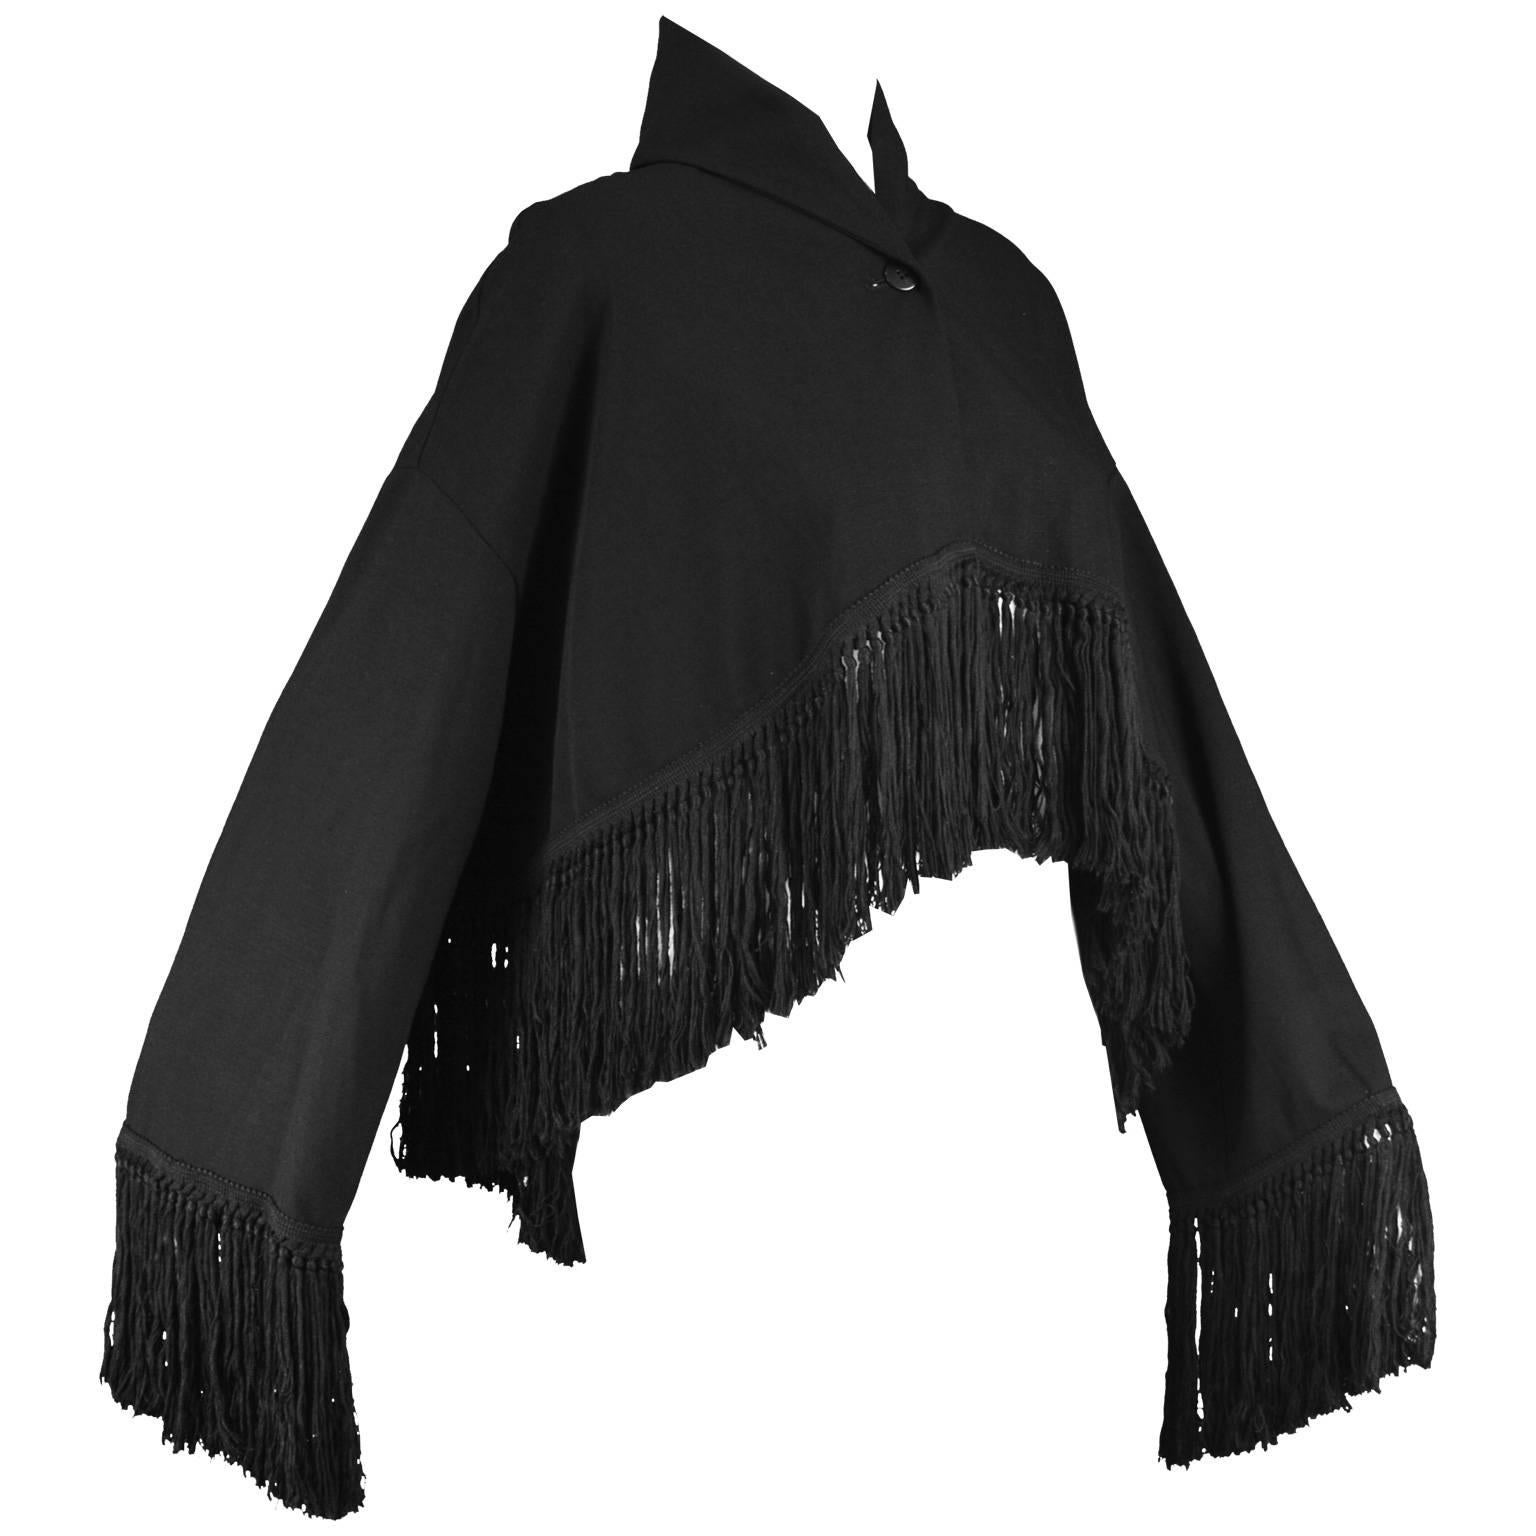 Romeo Gigli for Callaghan Knotted Fringed Black Stretch Wool Jacket, 1990s  For Sale